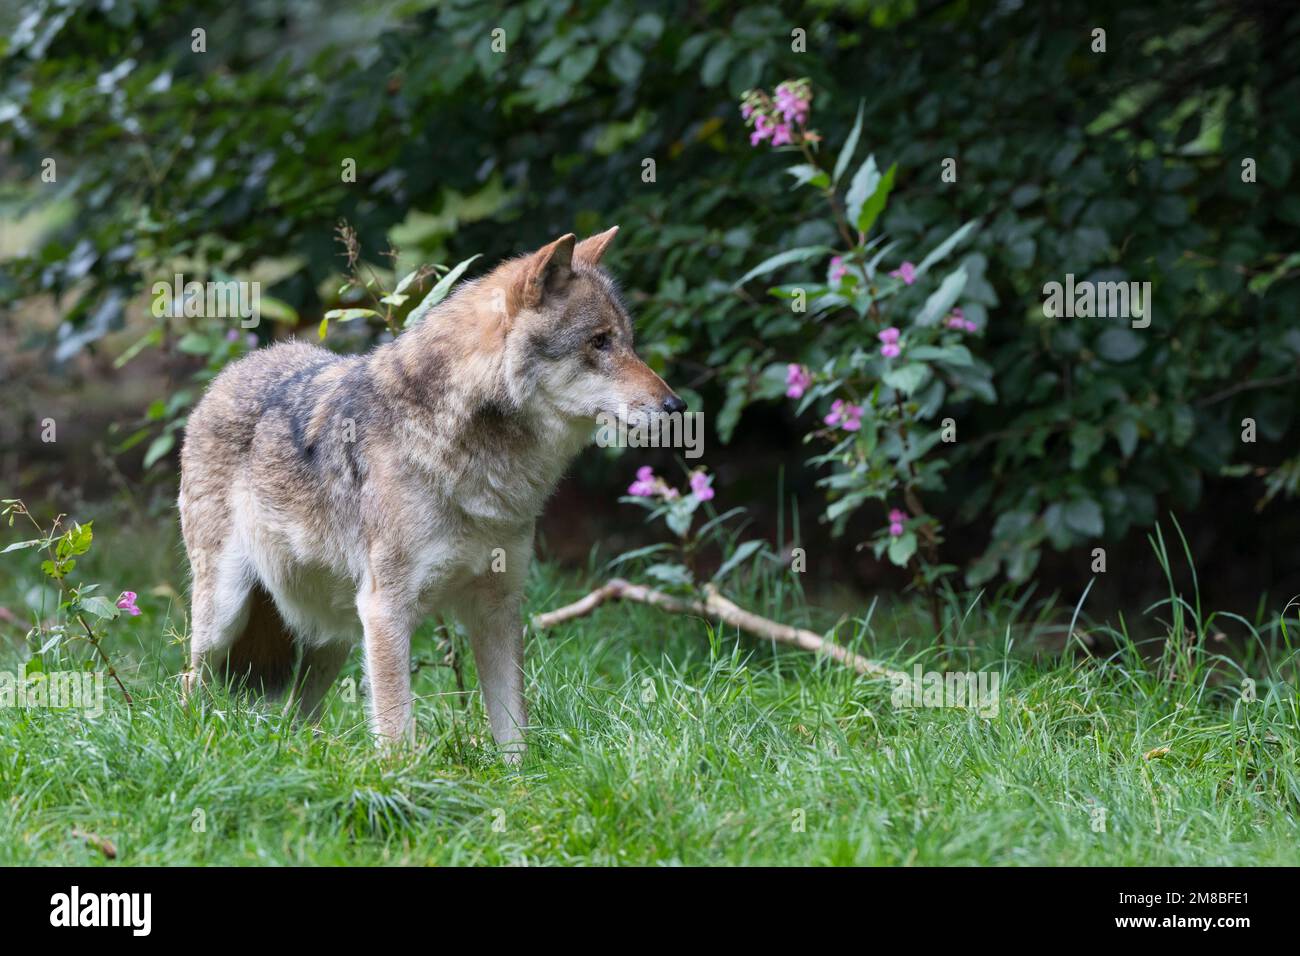 Wolf, Wölfe, Canis lupus, gray wolf, grey wolf, Le Loup gris Stock Photo